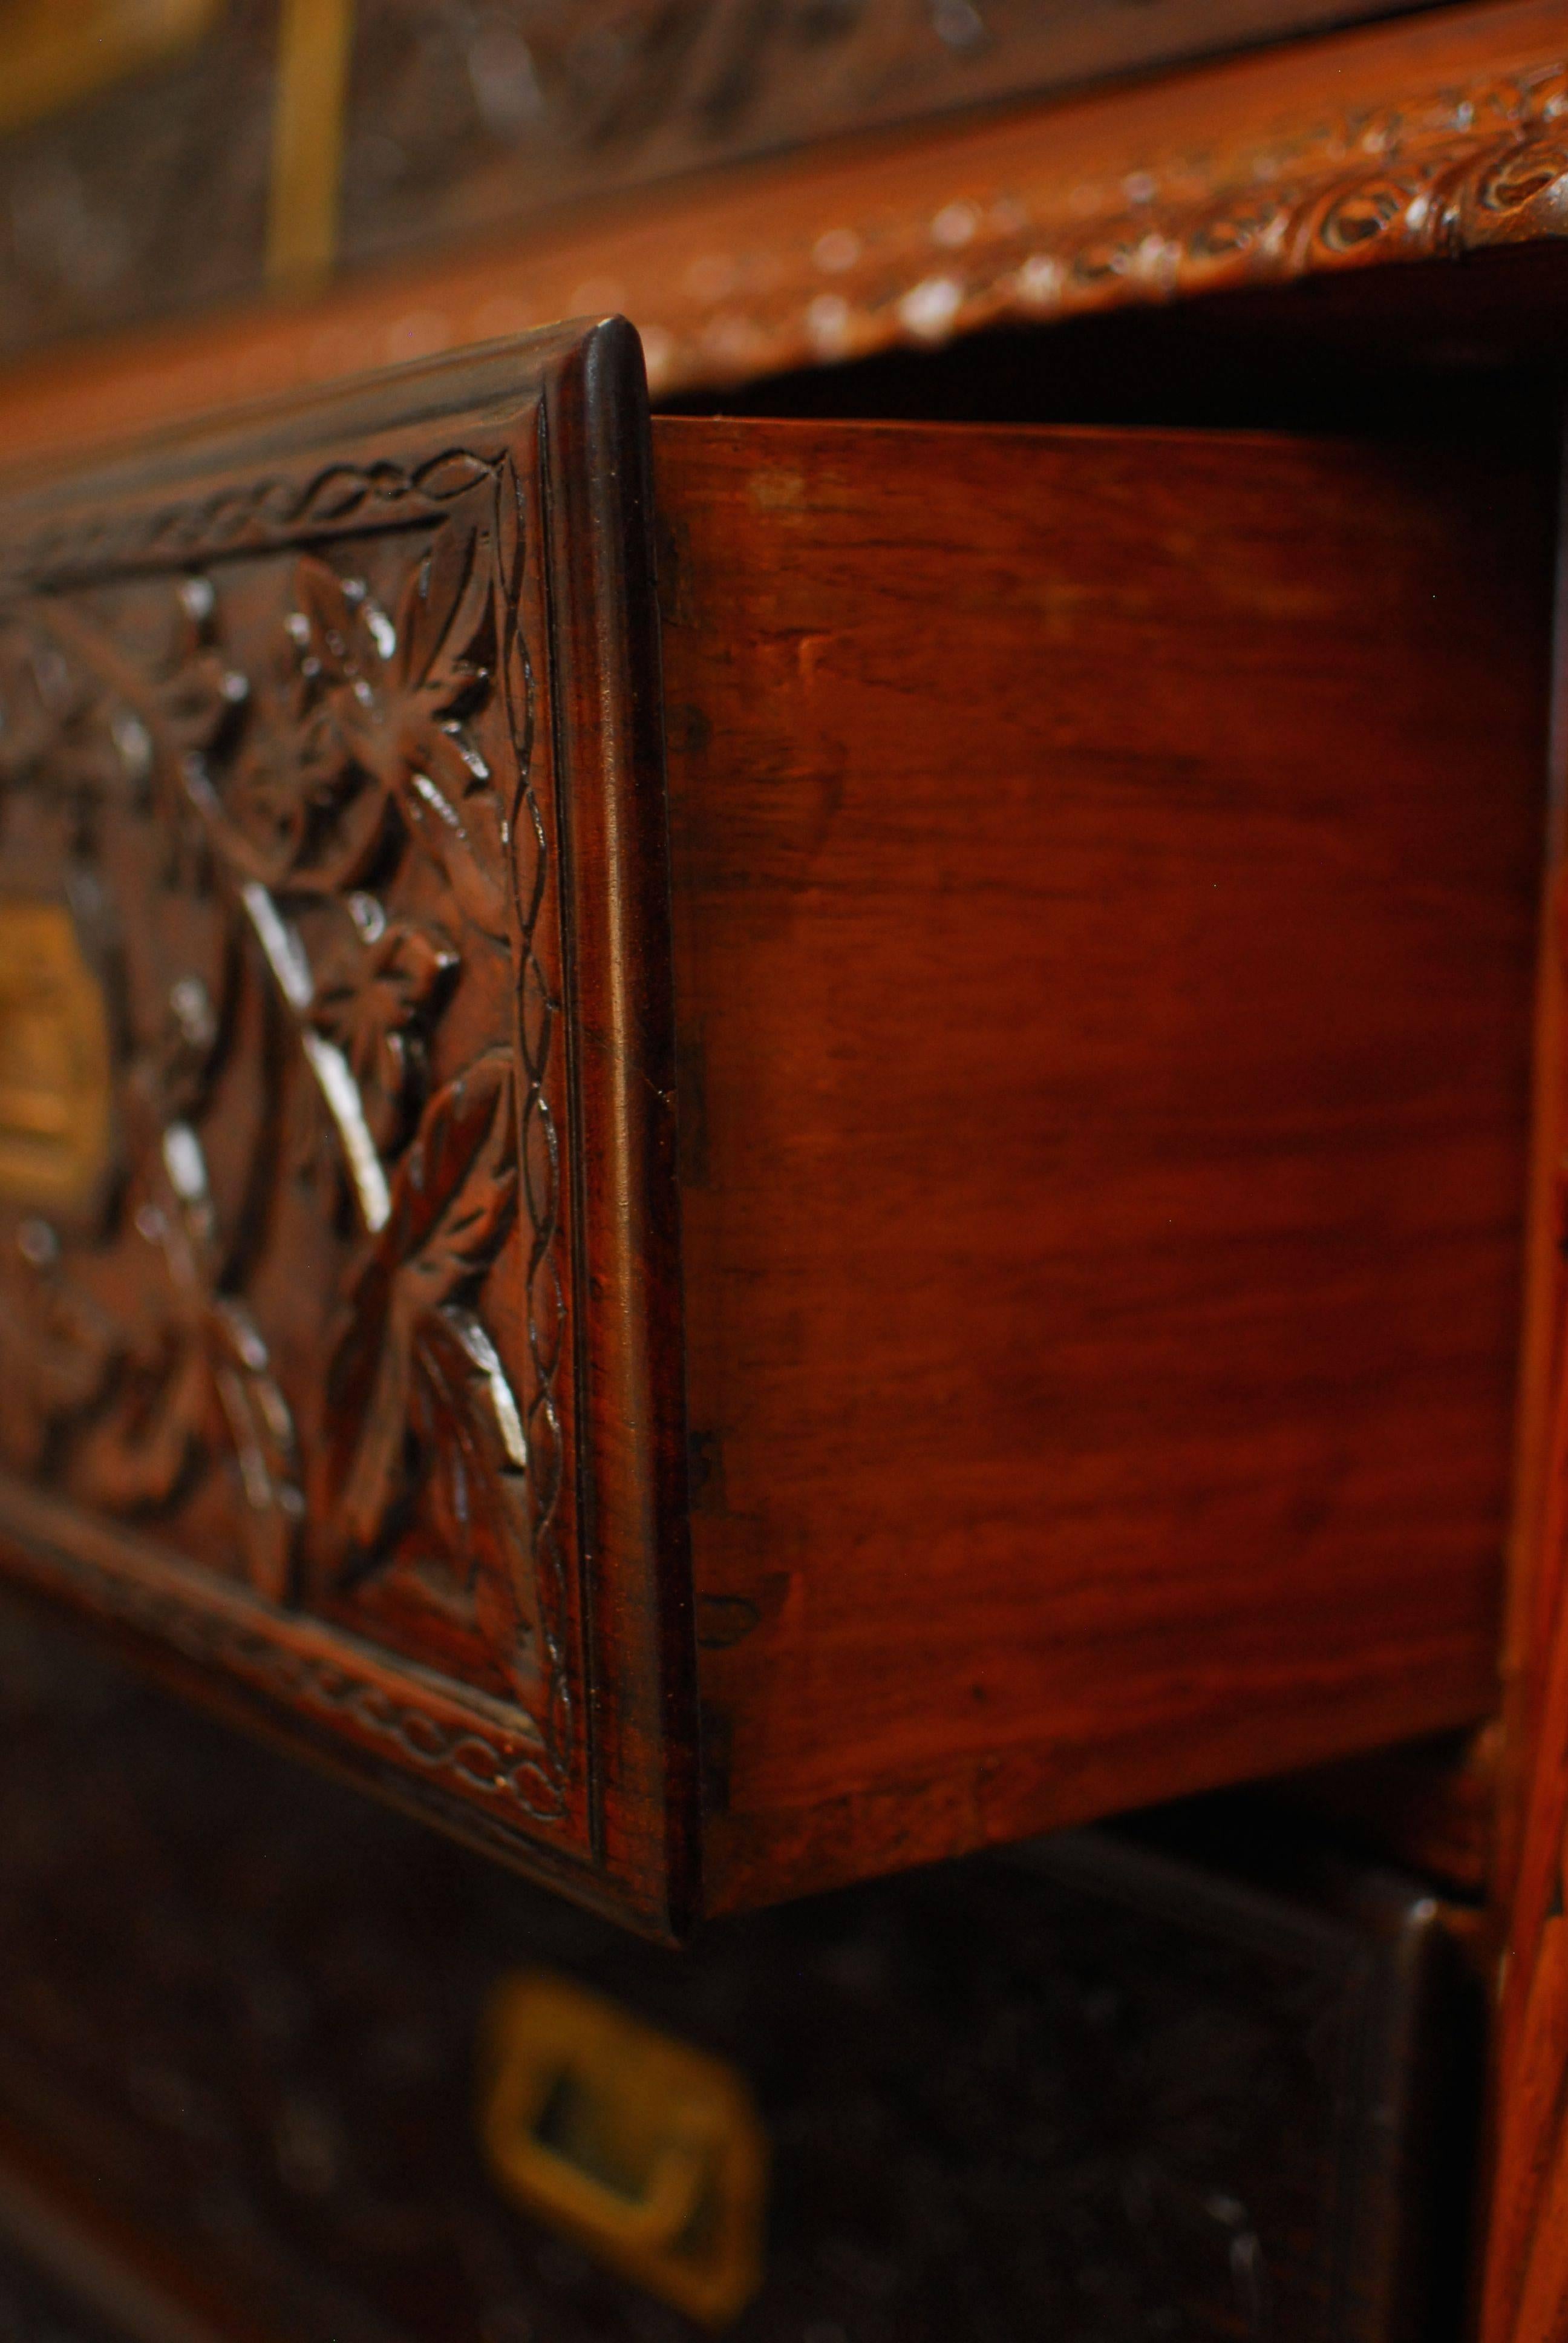 Vintage British Colonial library cabinet made of rosewood and teak features intricately carved foliate detail all over the case. Two arched brass trim cathedral windows adorn the top and three large drawers for storage on the bottom. All original